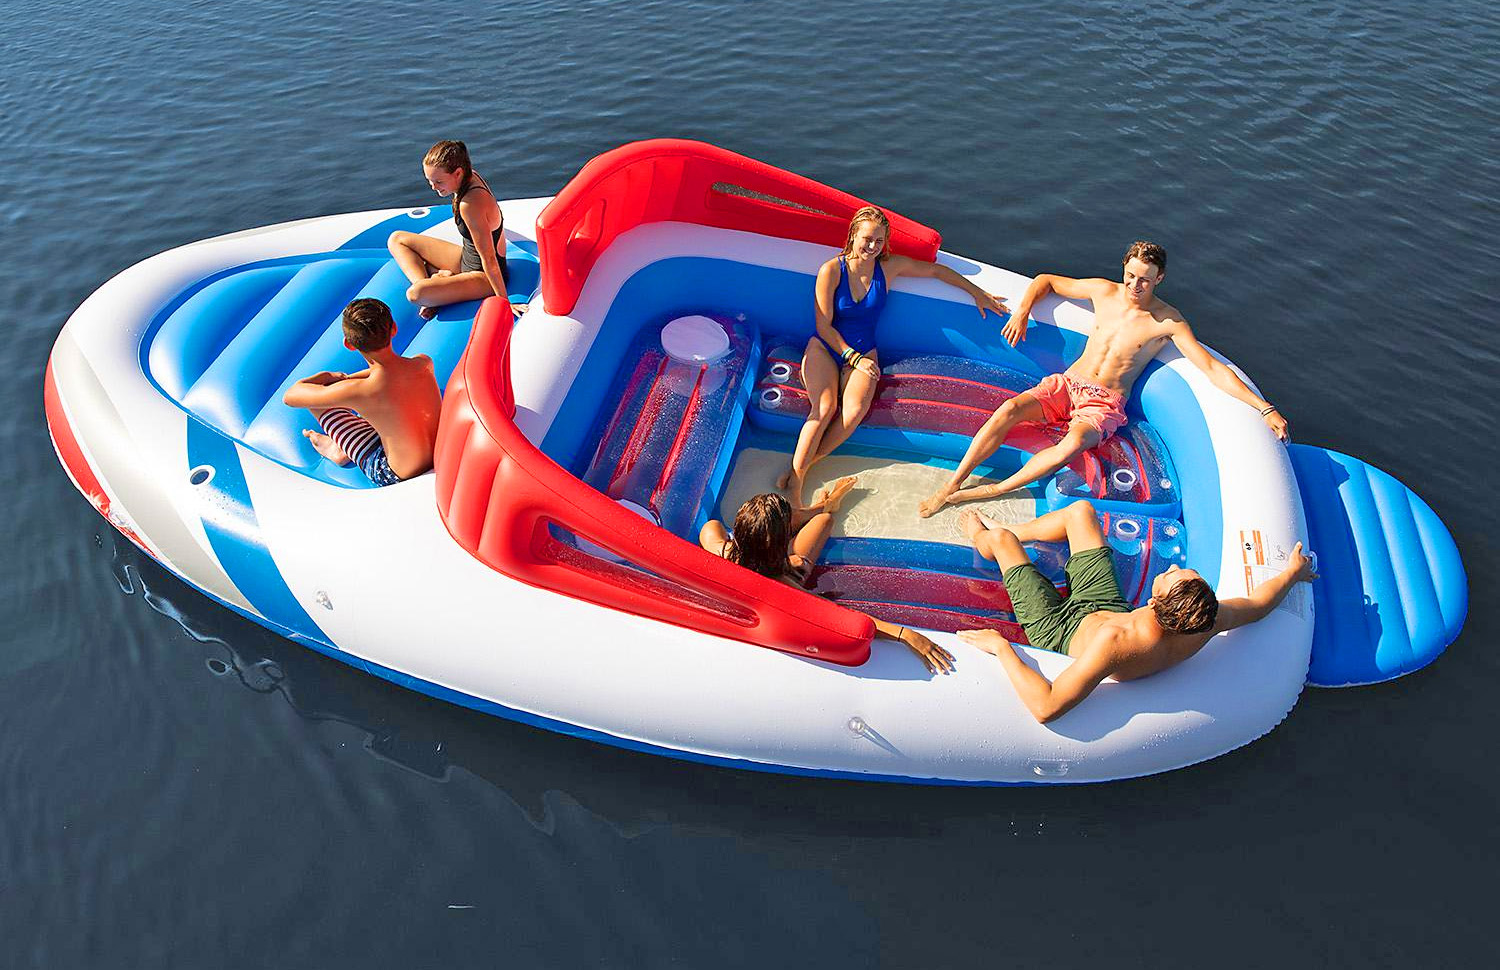 Giant 20-Foot Speed Boat Lake Float - Inflatable life-size Speed Boat lake float